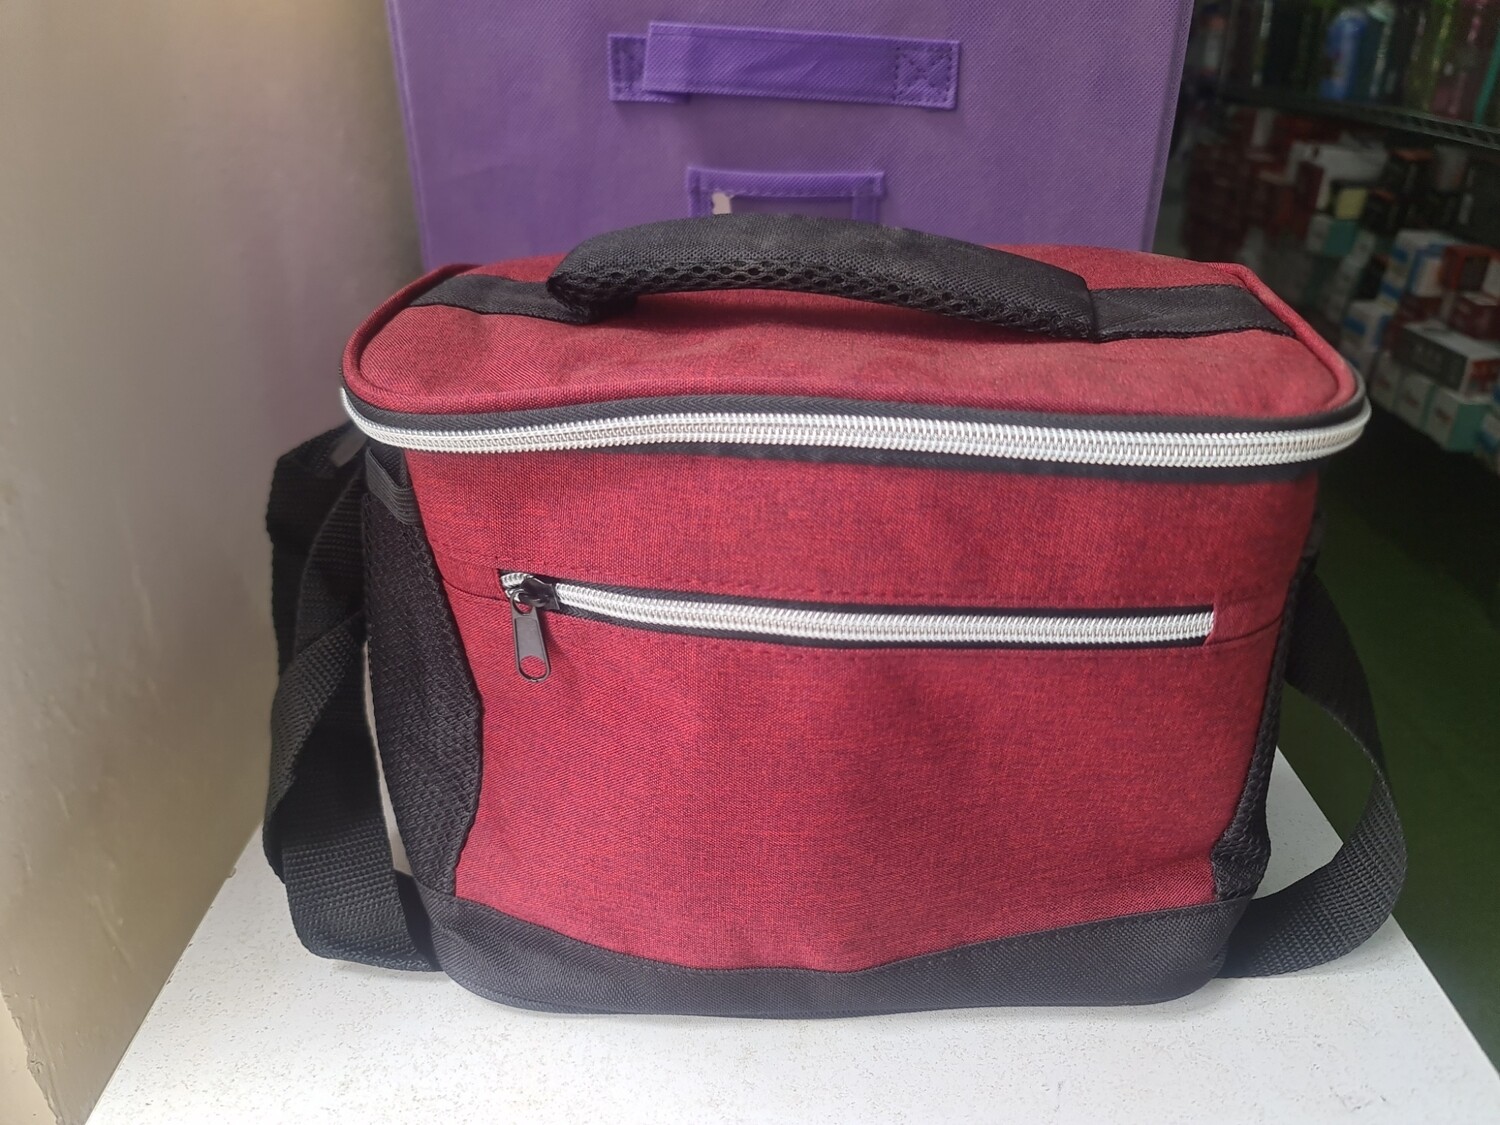 Insulated Lunch Bag with Two Compartments - Black/Maroon 4357